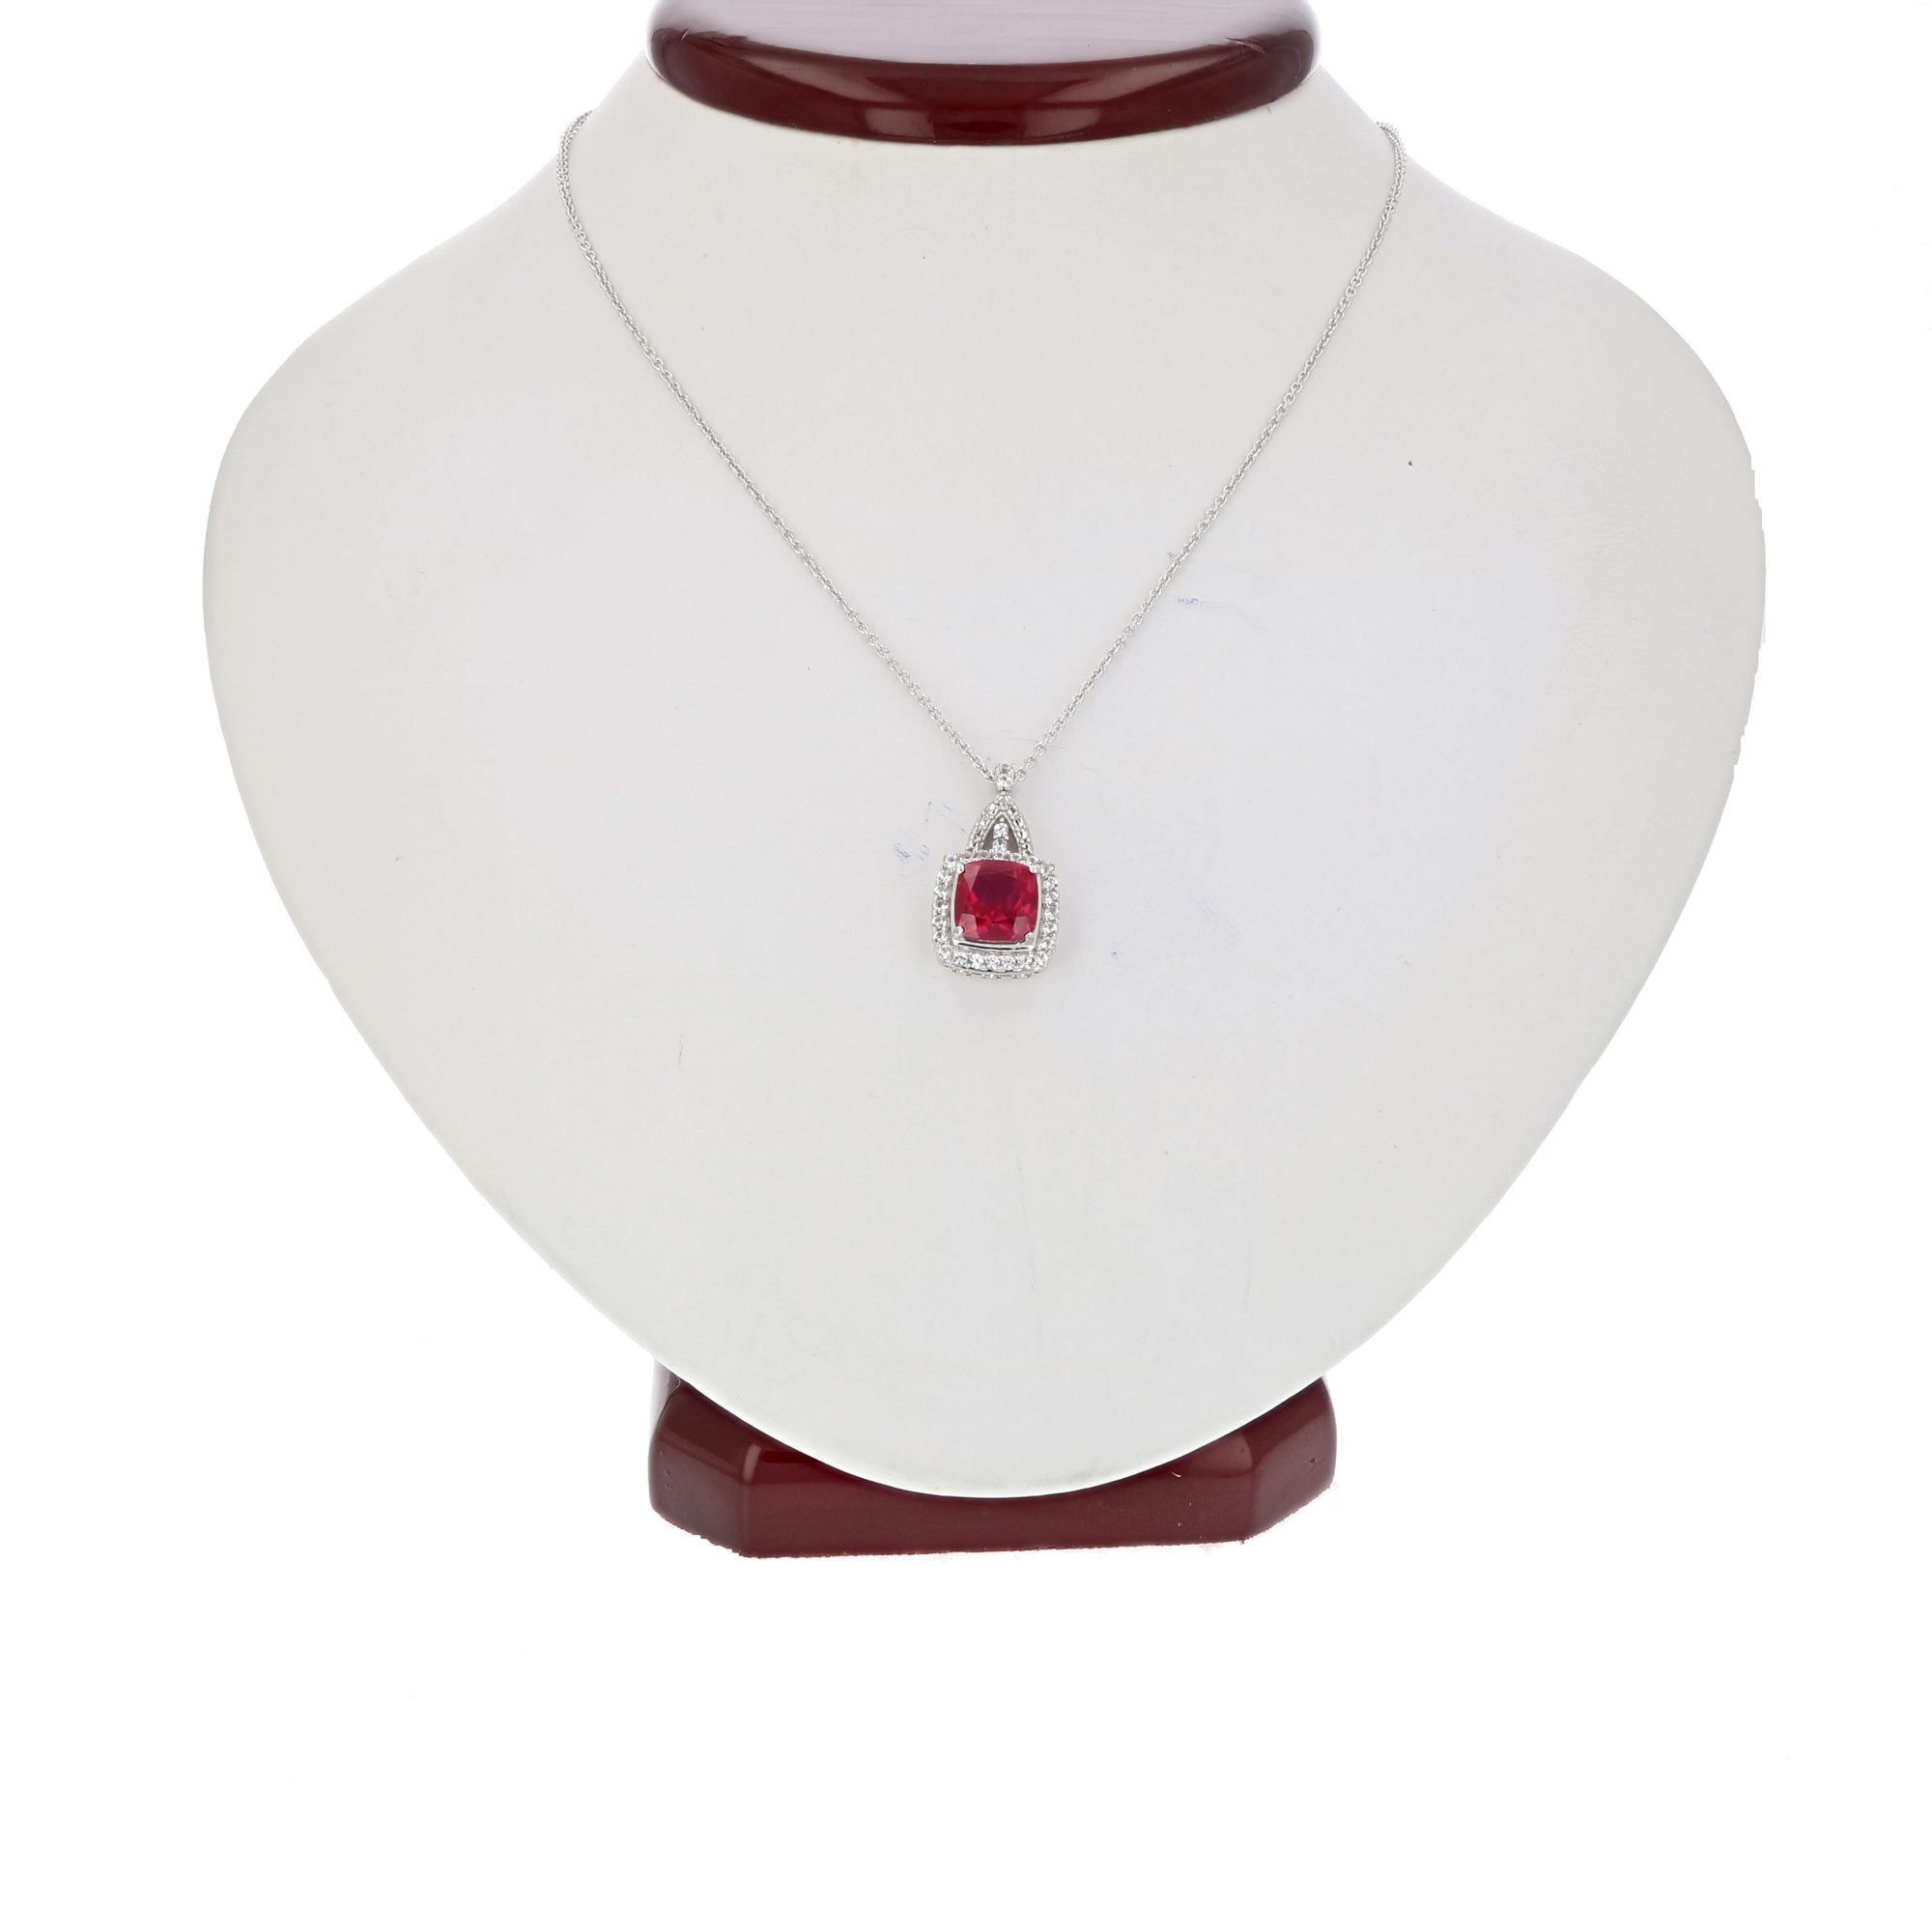 1.50 cttw Cushion Cut Created Ruby Pendant .925 Sterling Silver with Chain